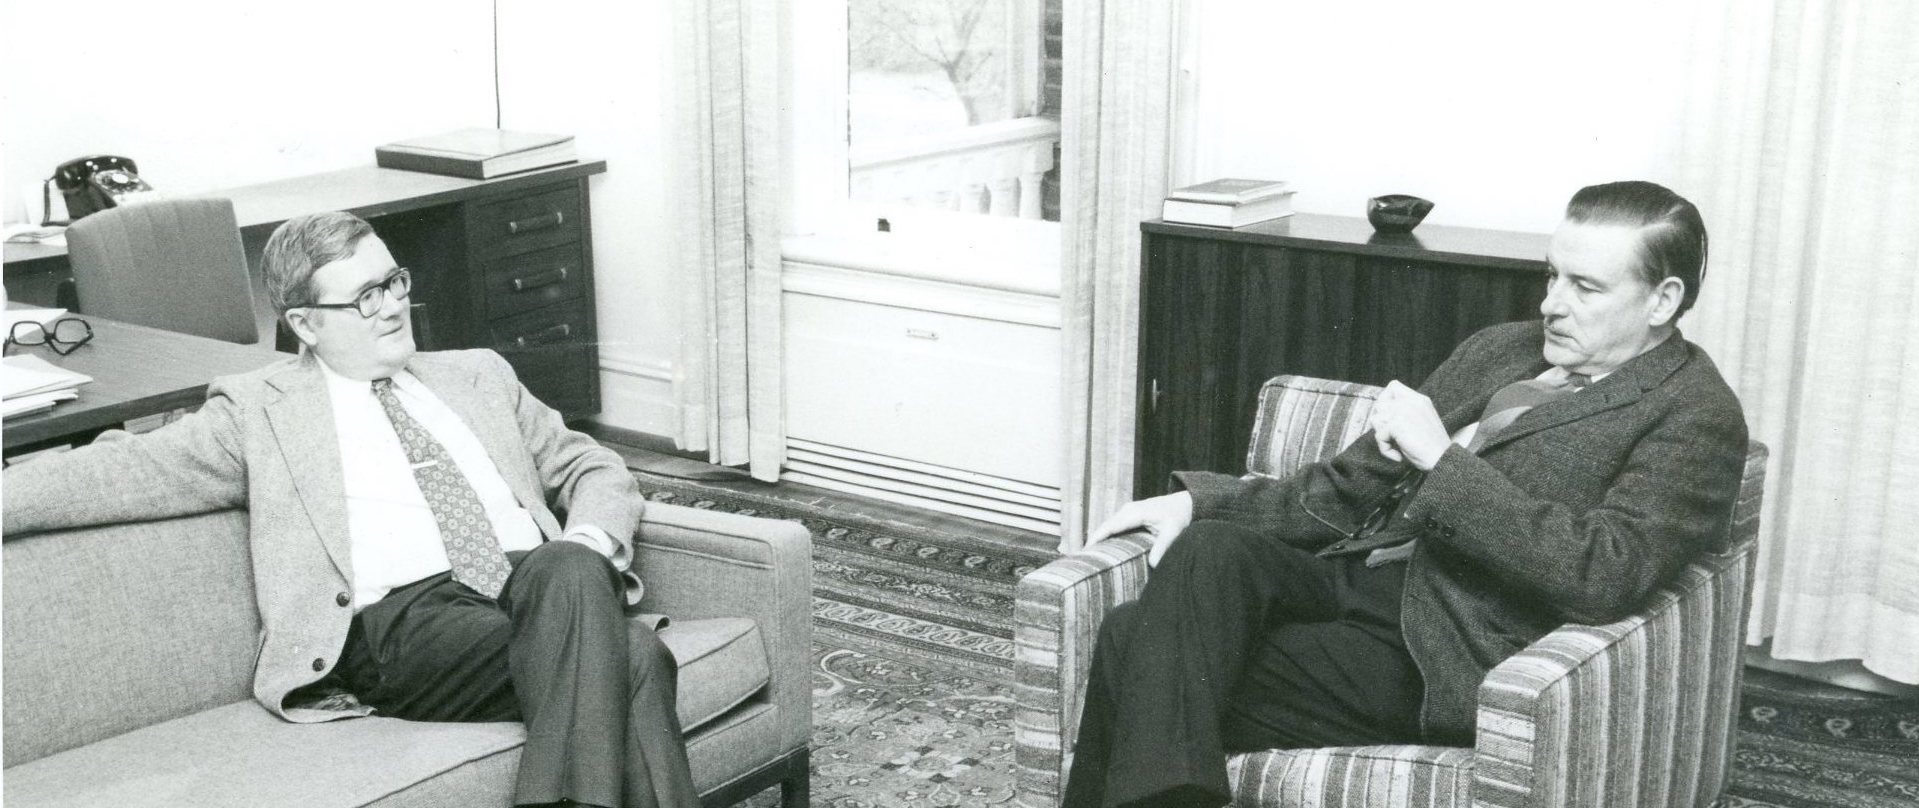 Black and white photograph. Gordon Tullock sits on a couch in an office listening. To his left, James Buchanan sits on a chair, speaking.